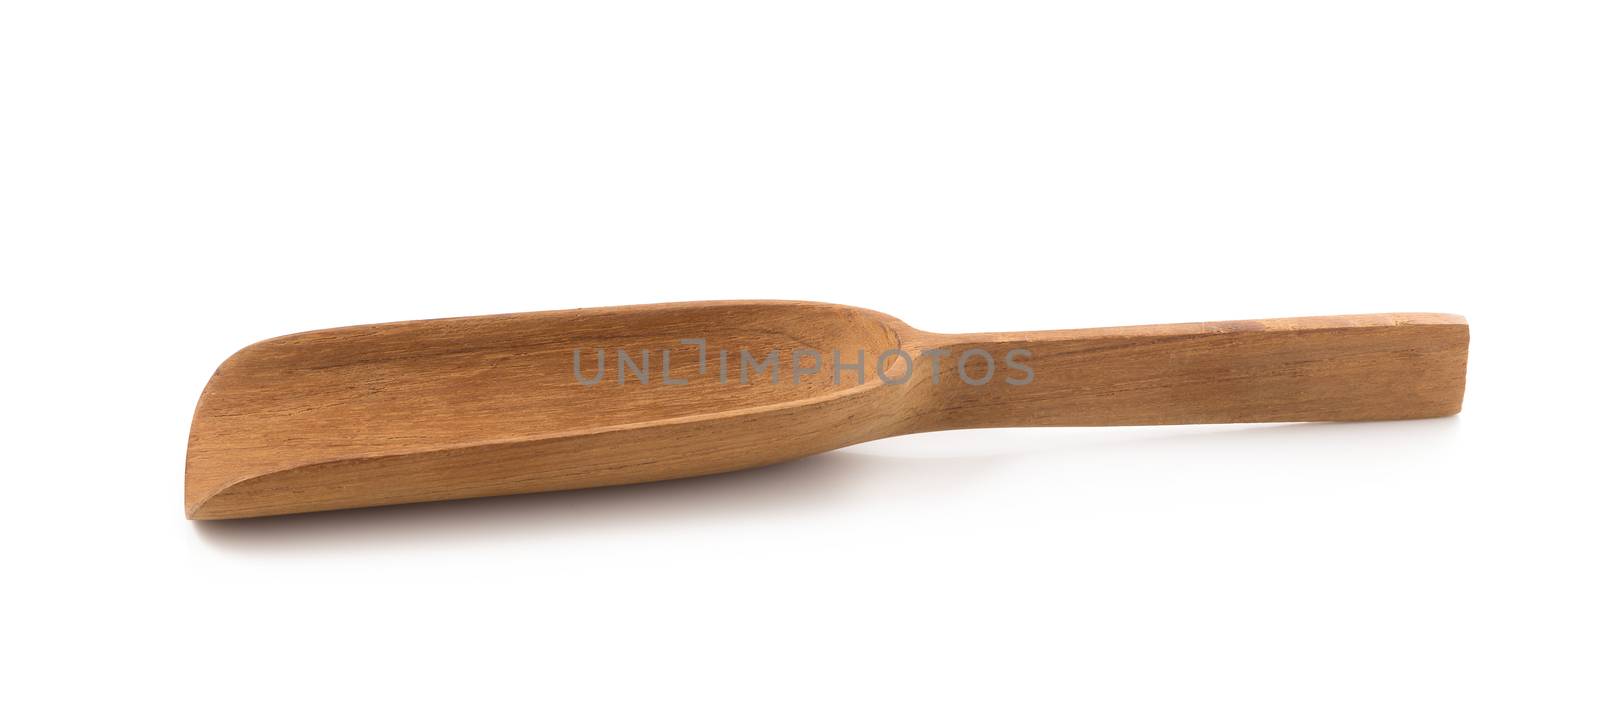 Empty wooden scoop isolated on a white background by kaiskynet